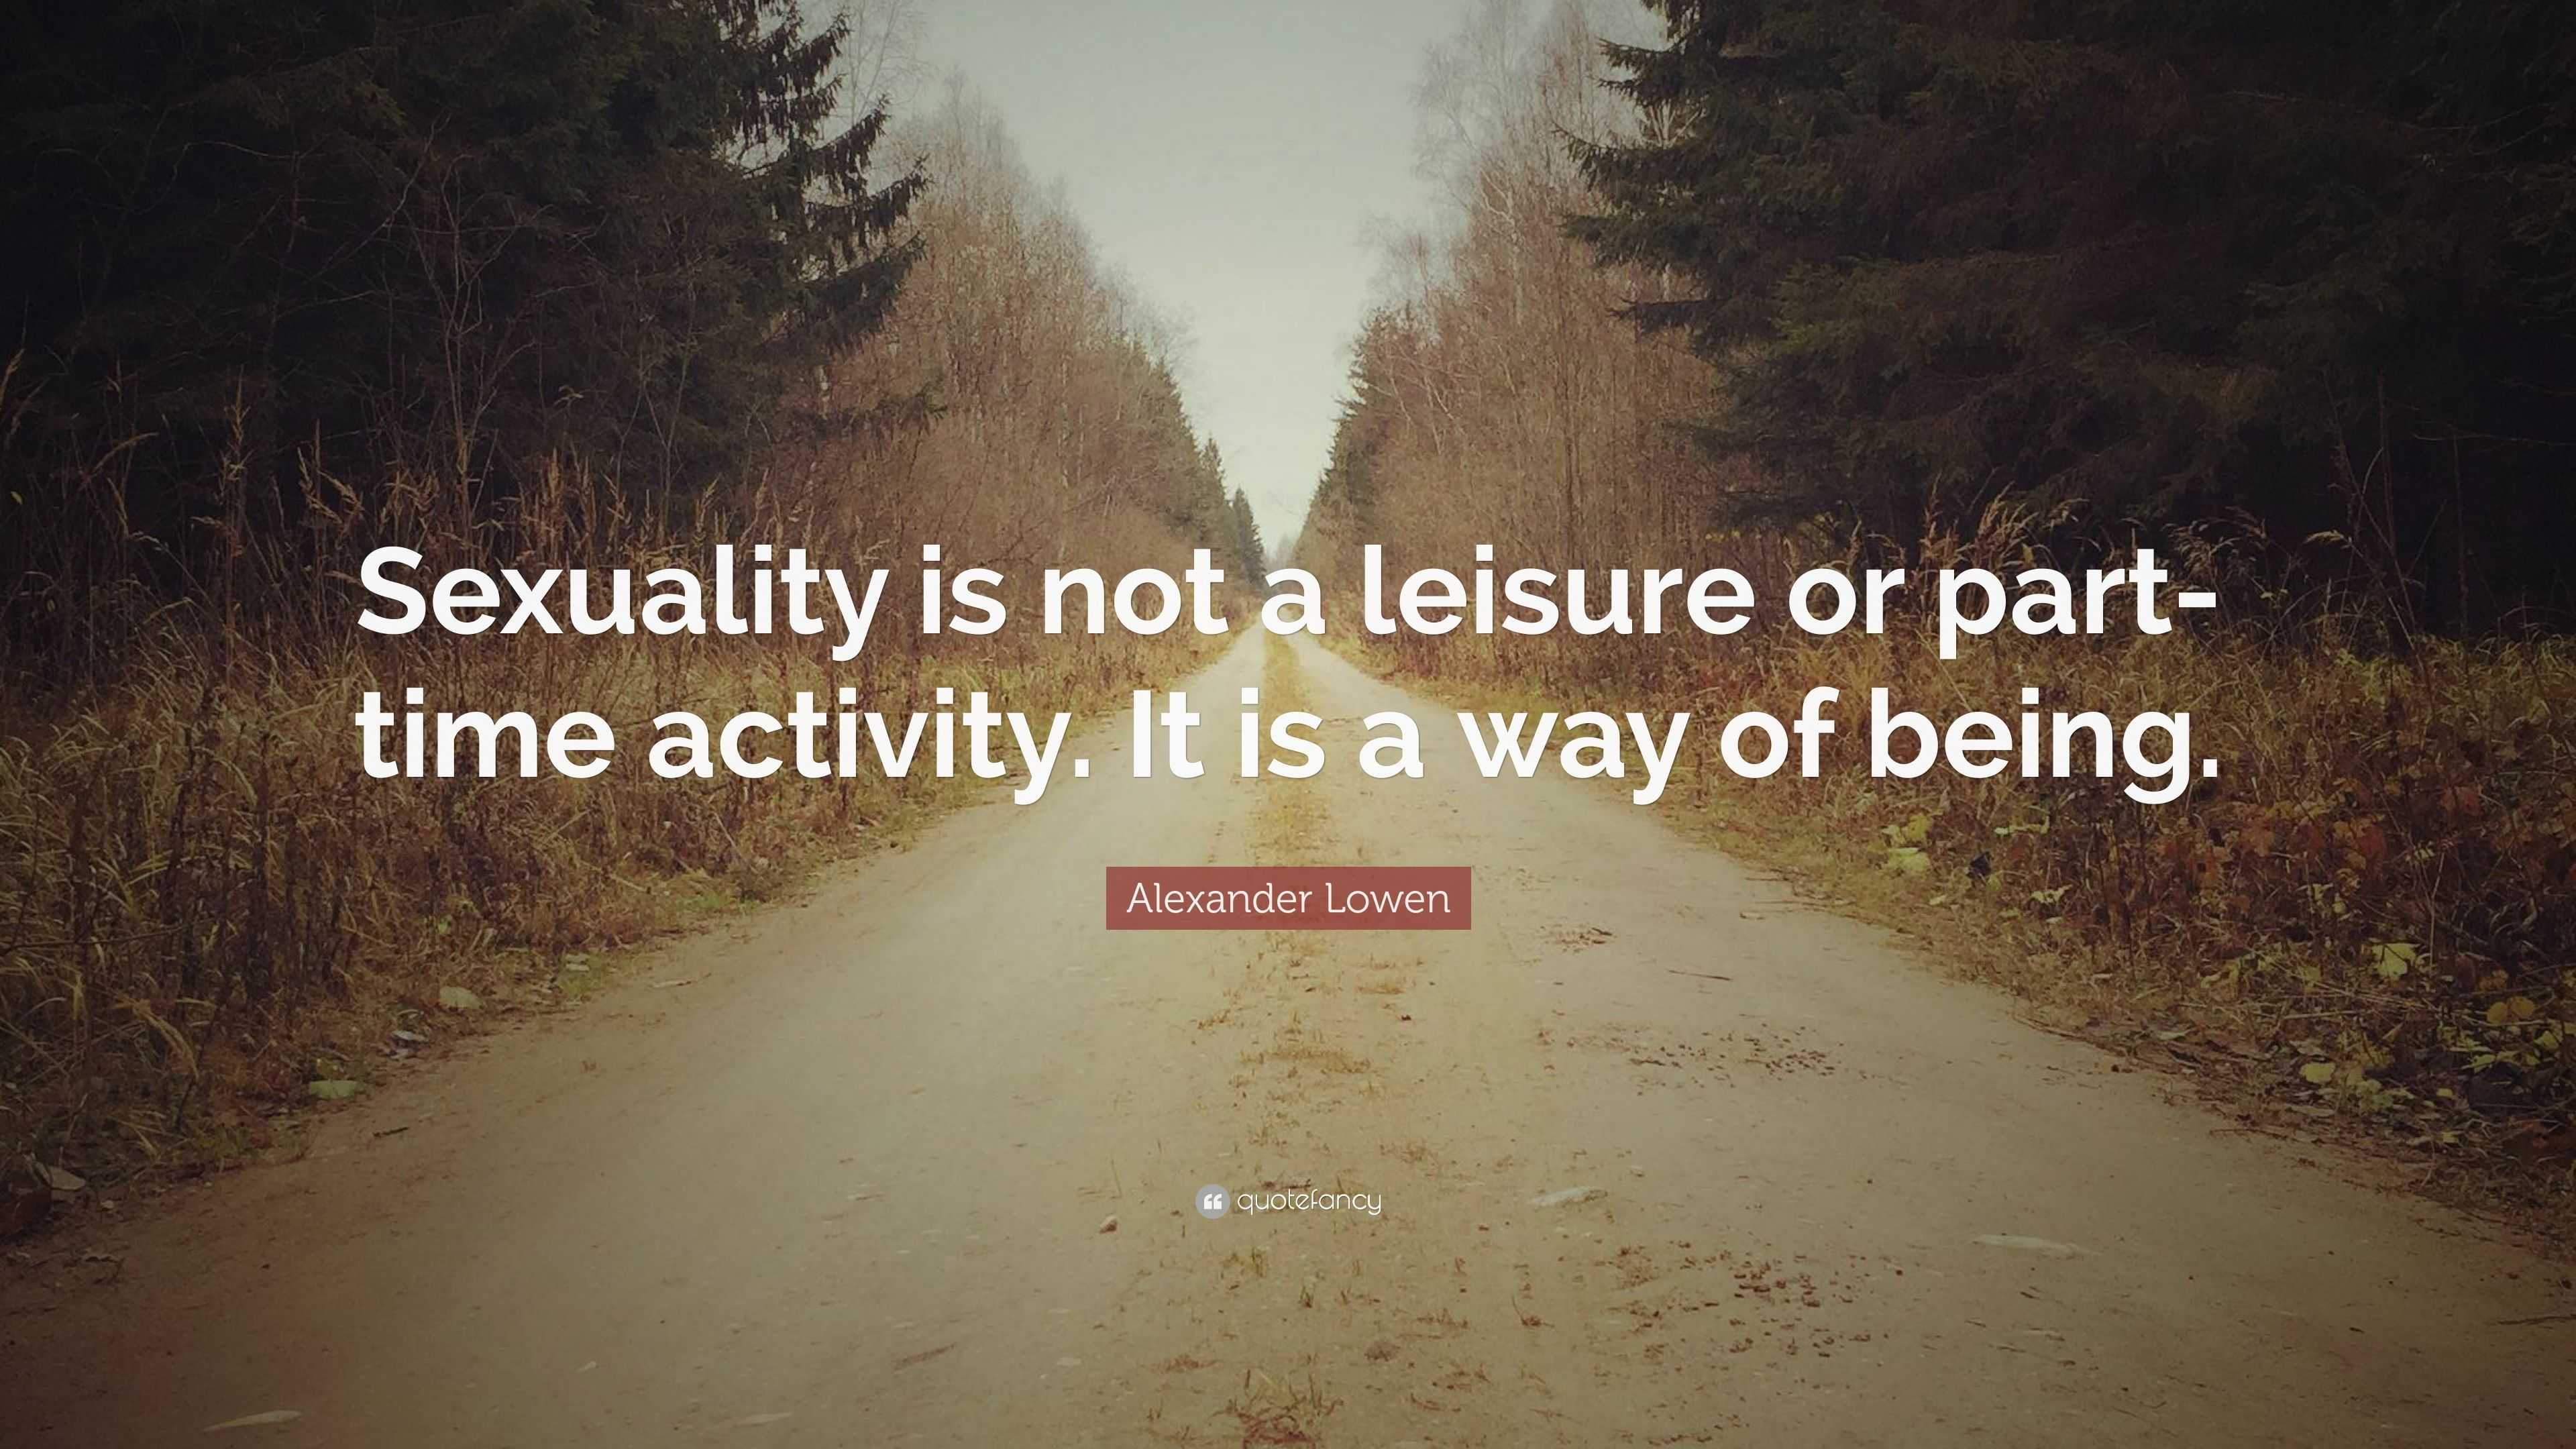 Alexander Lowen Quote “sexuality Is Not A Leisure Or Part Time Activity It Is A Way Of Being” 4442